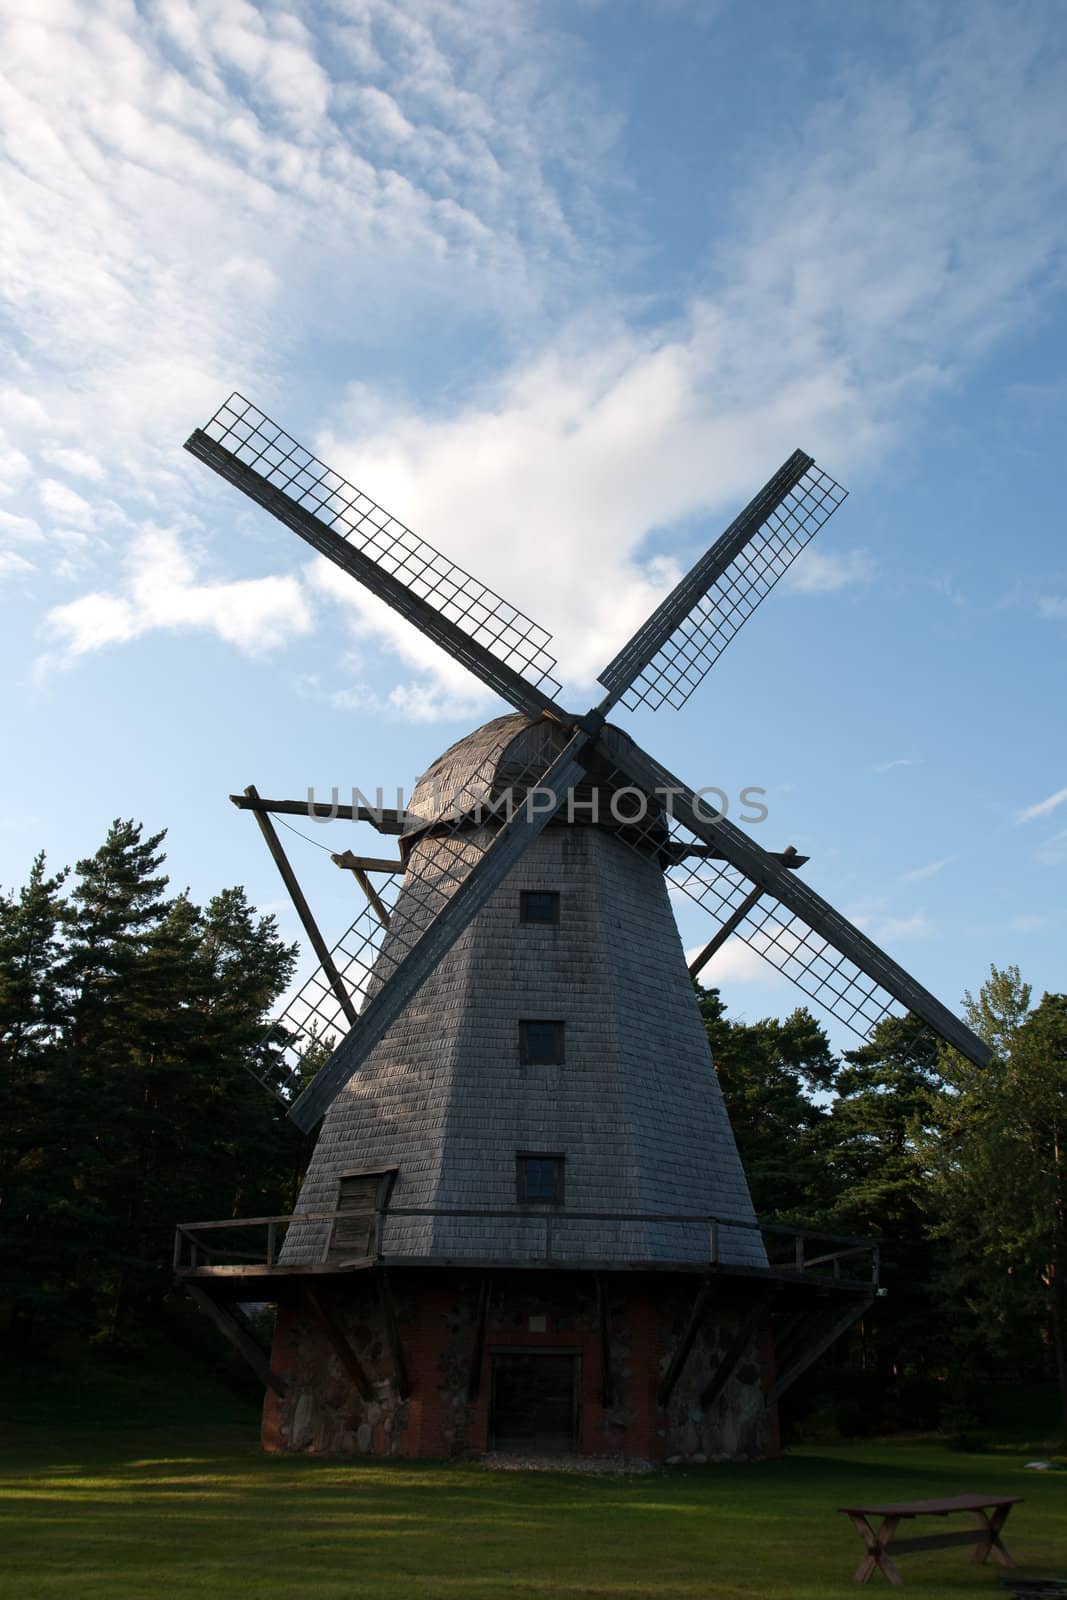 An old traditional windmill with wooden sails in countryside